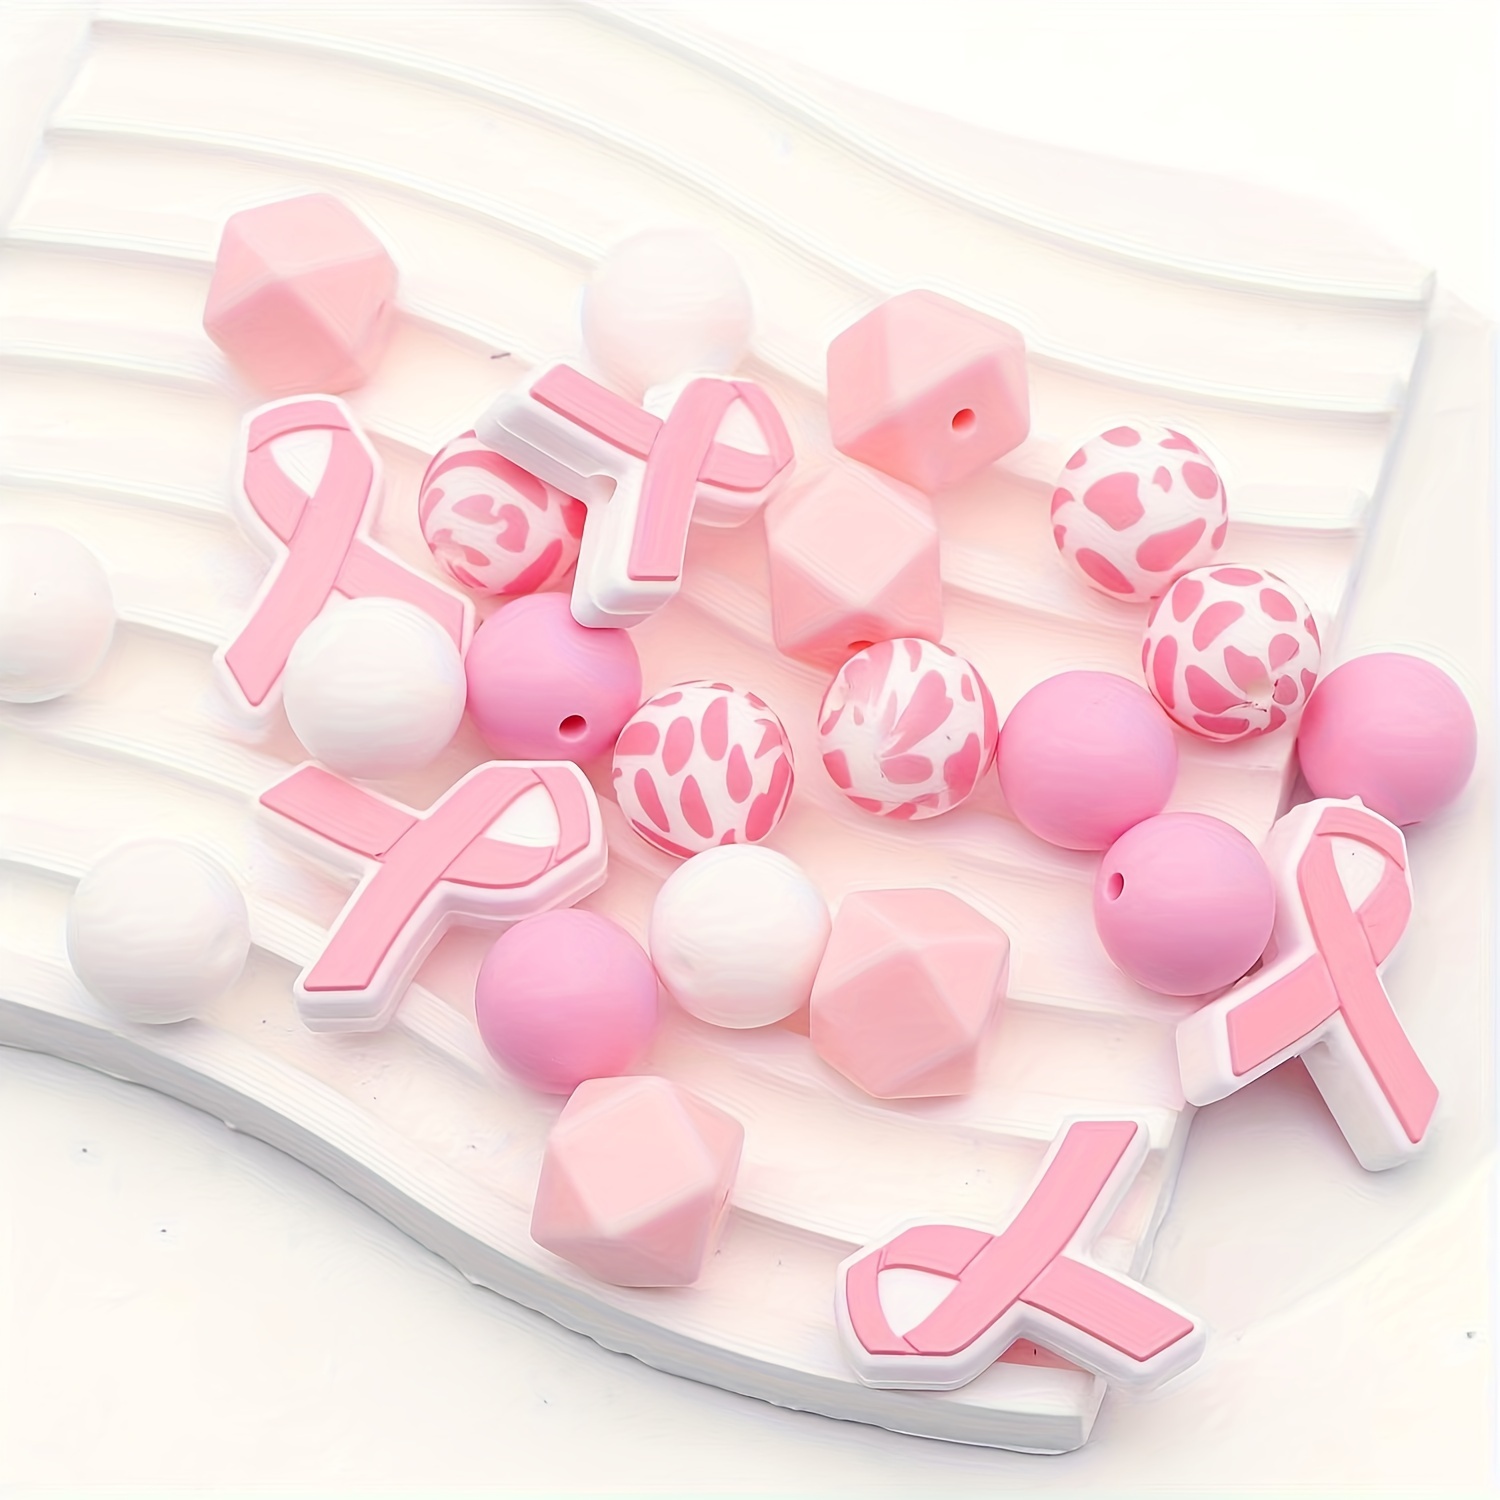 

Breast Cancer Awareness Diy Craft Set - Pink Ribbon Patterned & Solid Silicone Beads, Jewelry Making Kit With Charms, Keychain Accessories